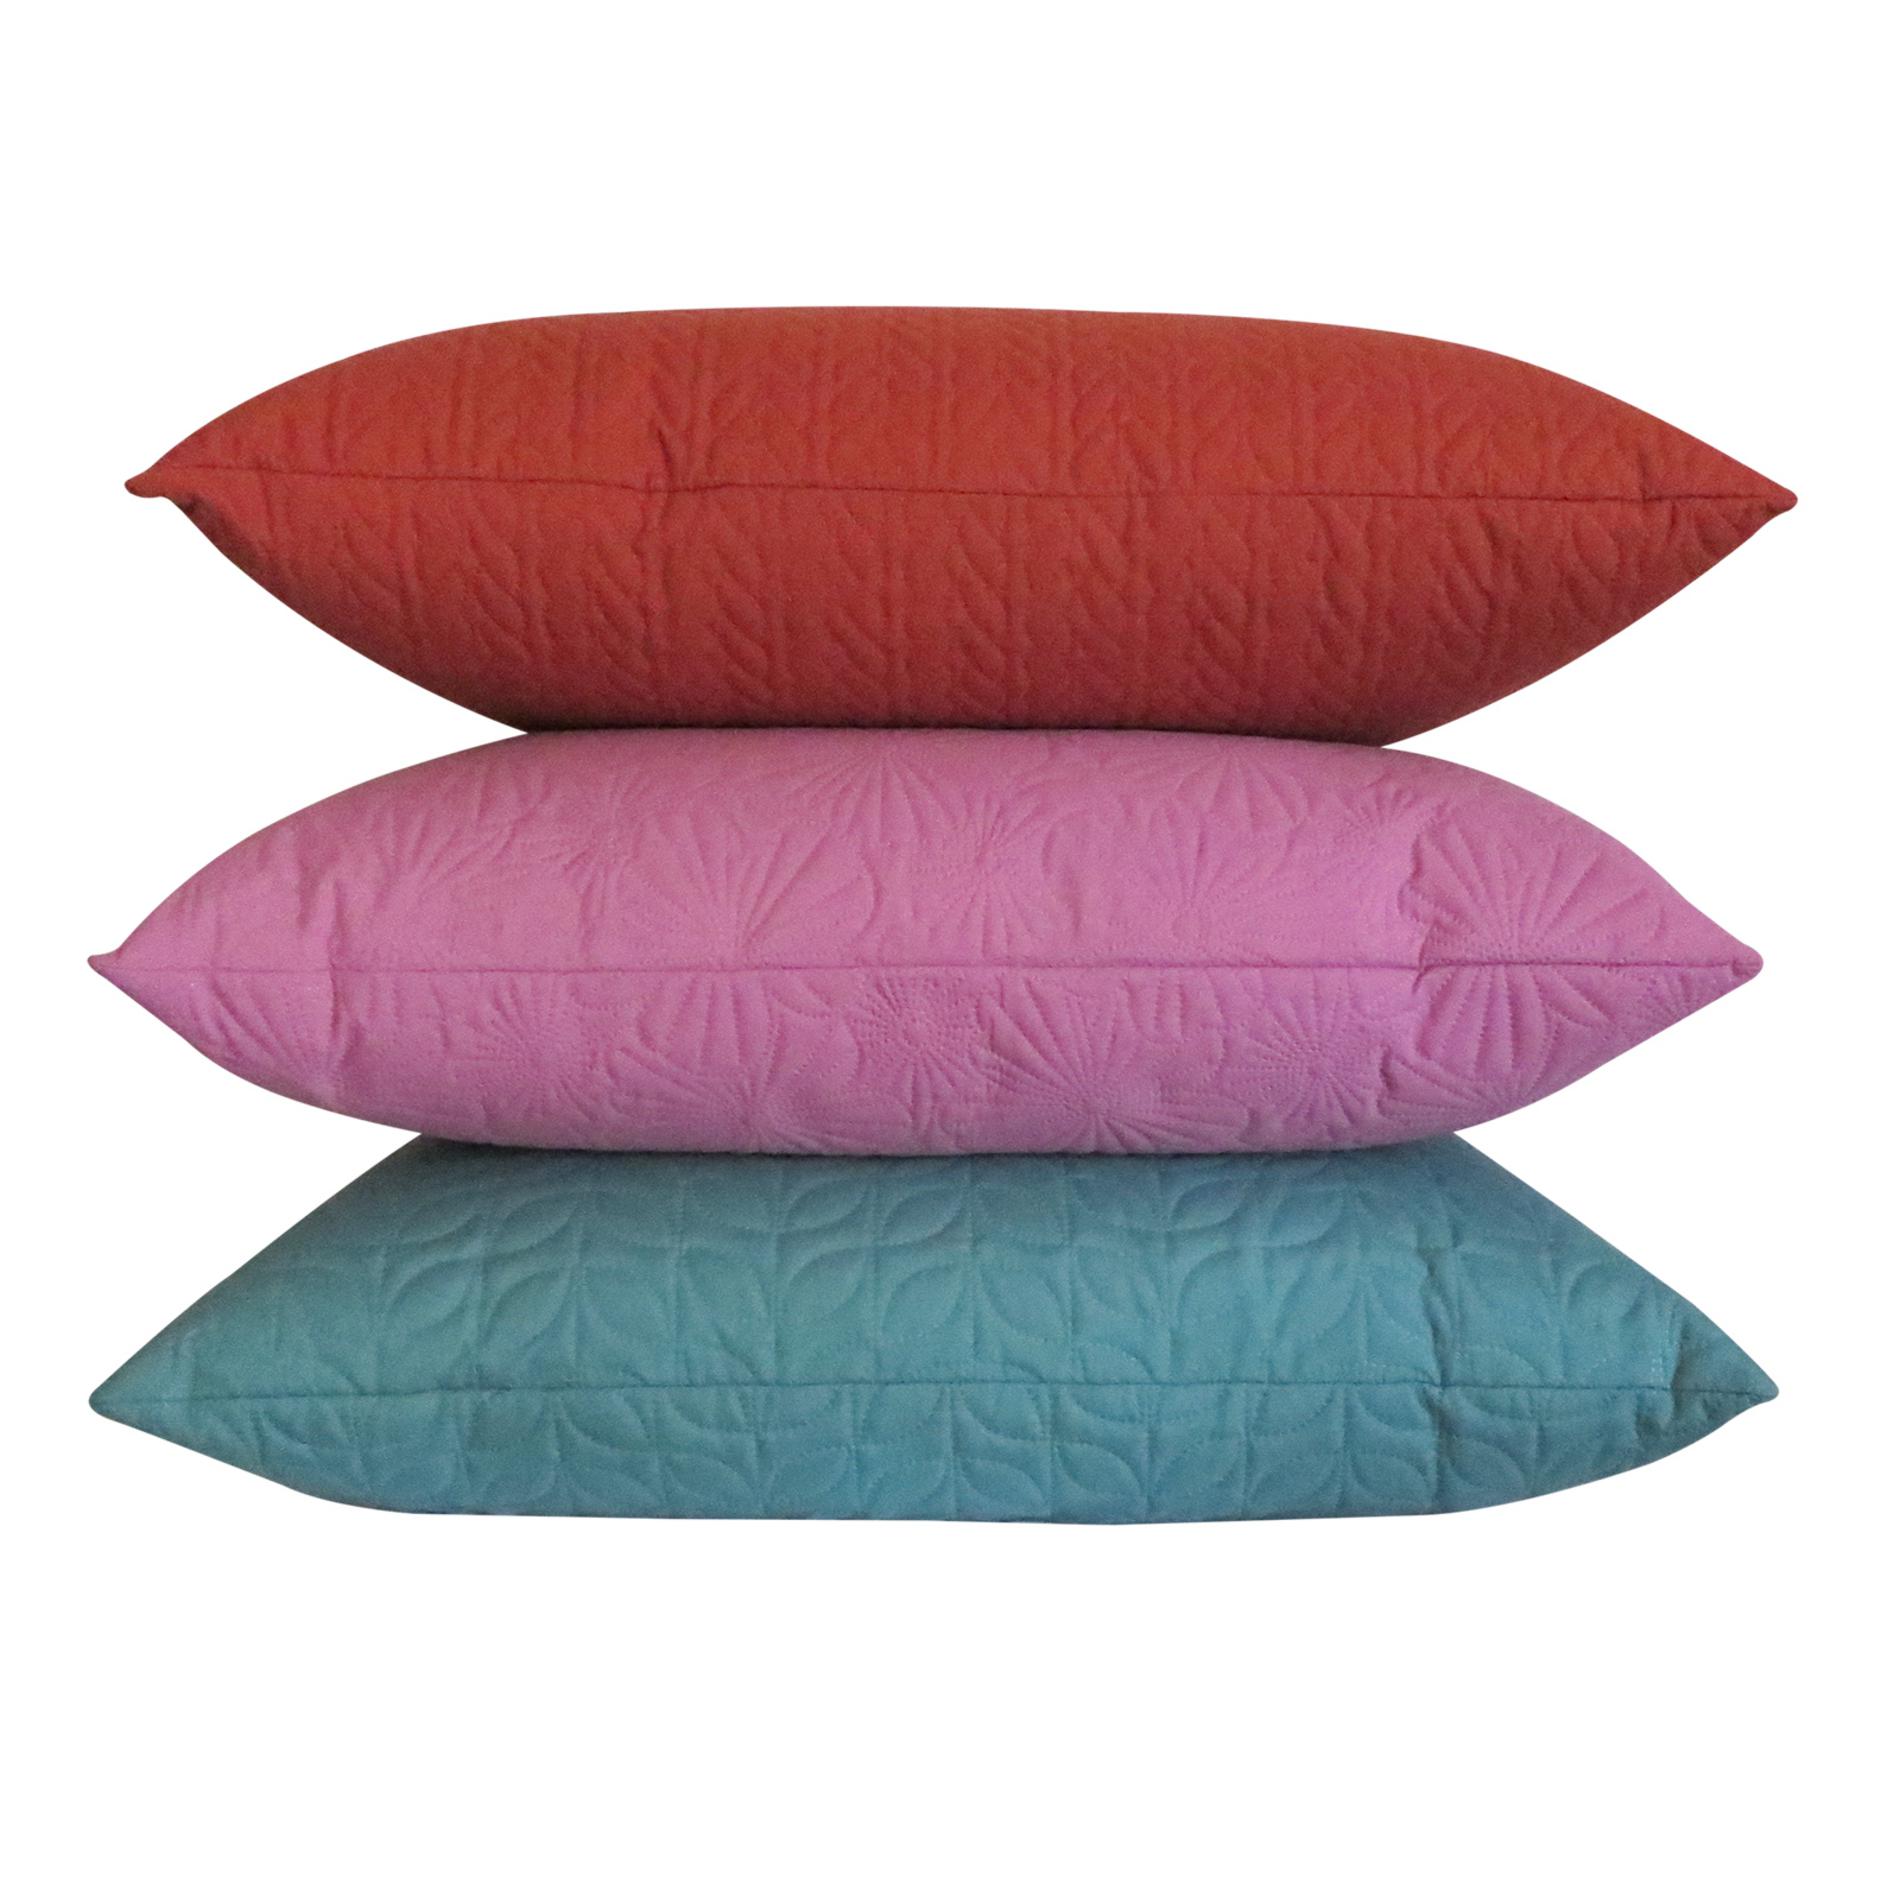 Essential Home Quilted Pinsonic Bed Pillows